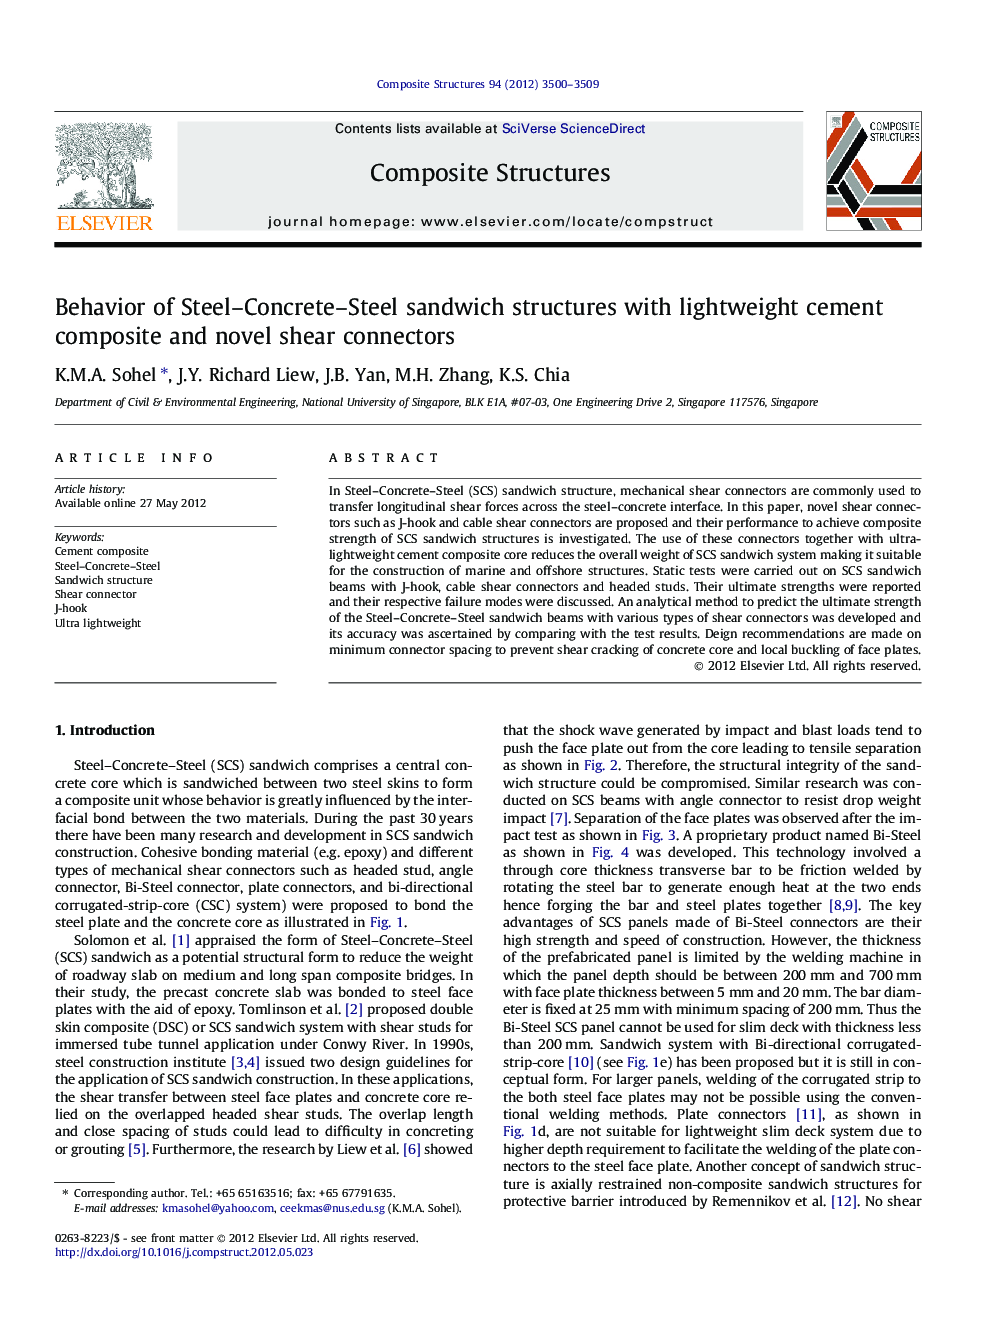 Behavior of Steel–Concrete–Steel sandwich structures with lightweight cement composite and novel shear connectors